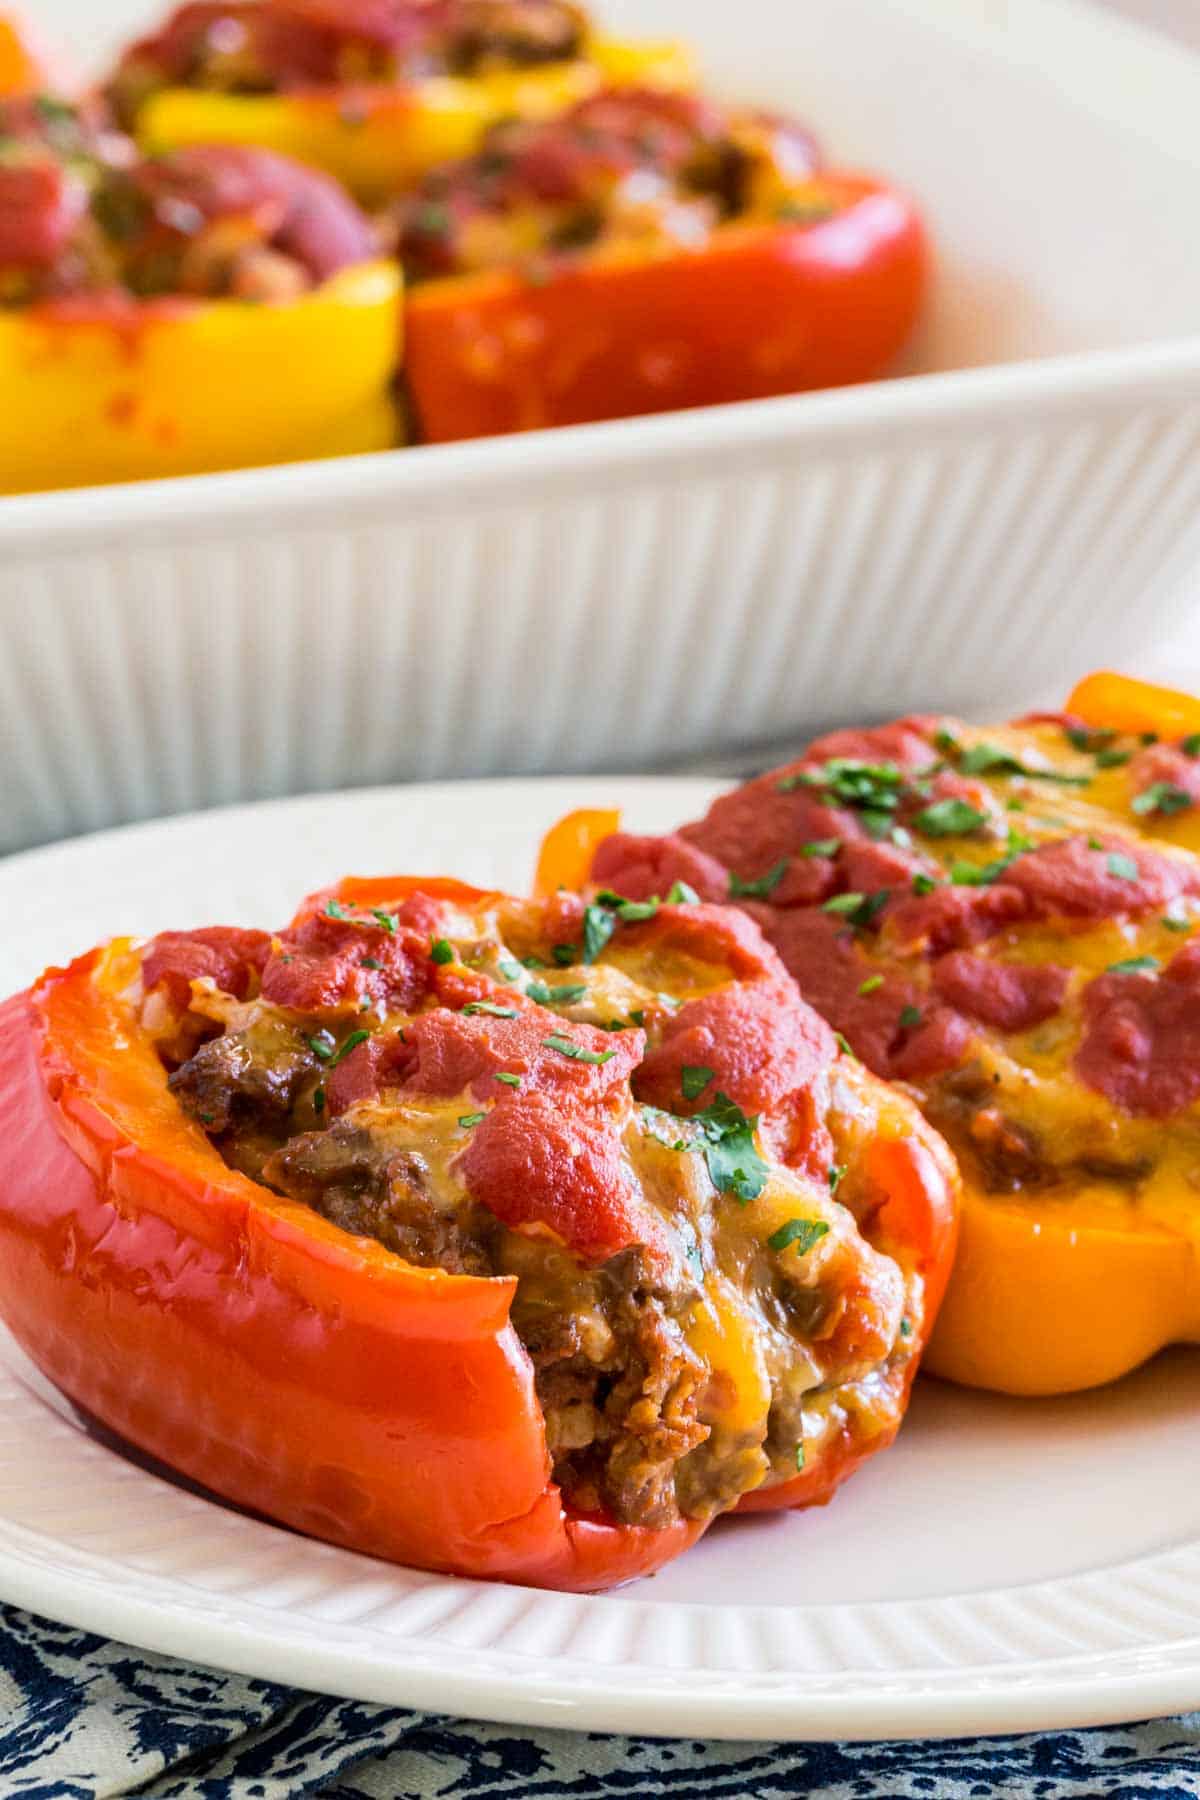 Two stuffed pepper halves on a white plate, with more stuffed peppers in a casserole dish in the background.